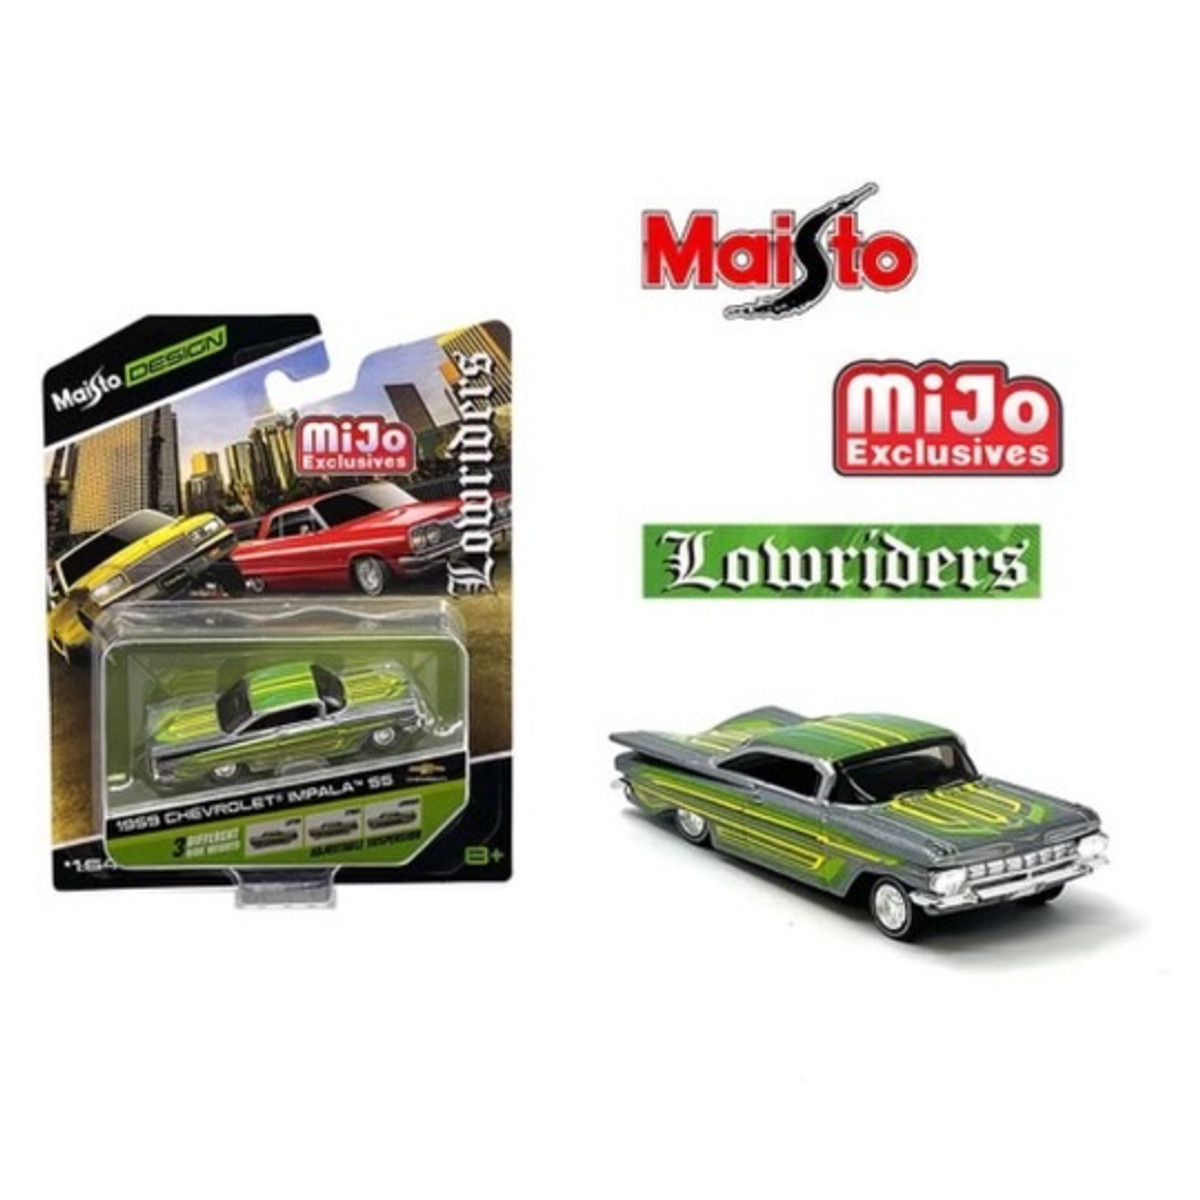 Maisto 1:64 1959 Chevrolet Impala SS – Silver – Design Lowriders MiJo Exclusives Adjustable Suspension Limited Edition 1 Of 3600 